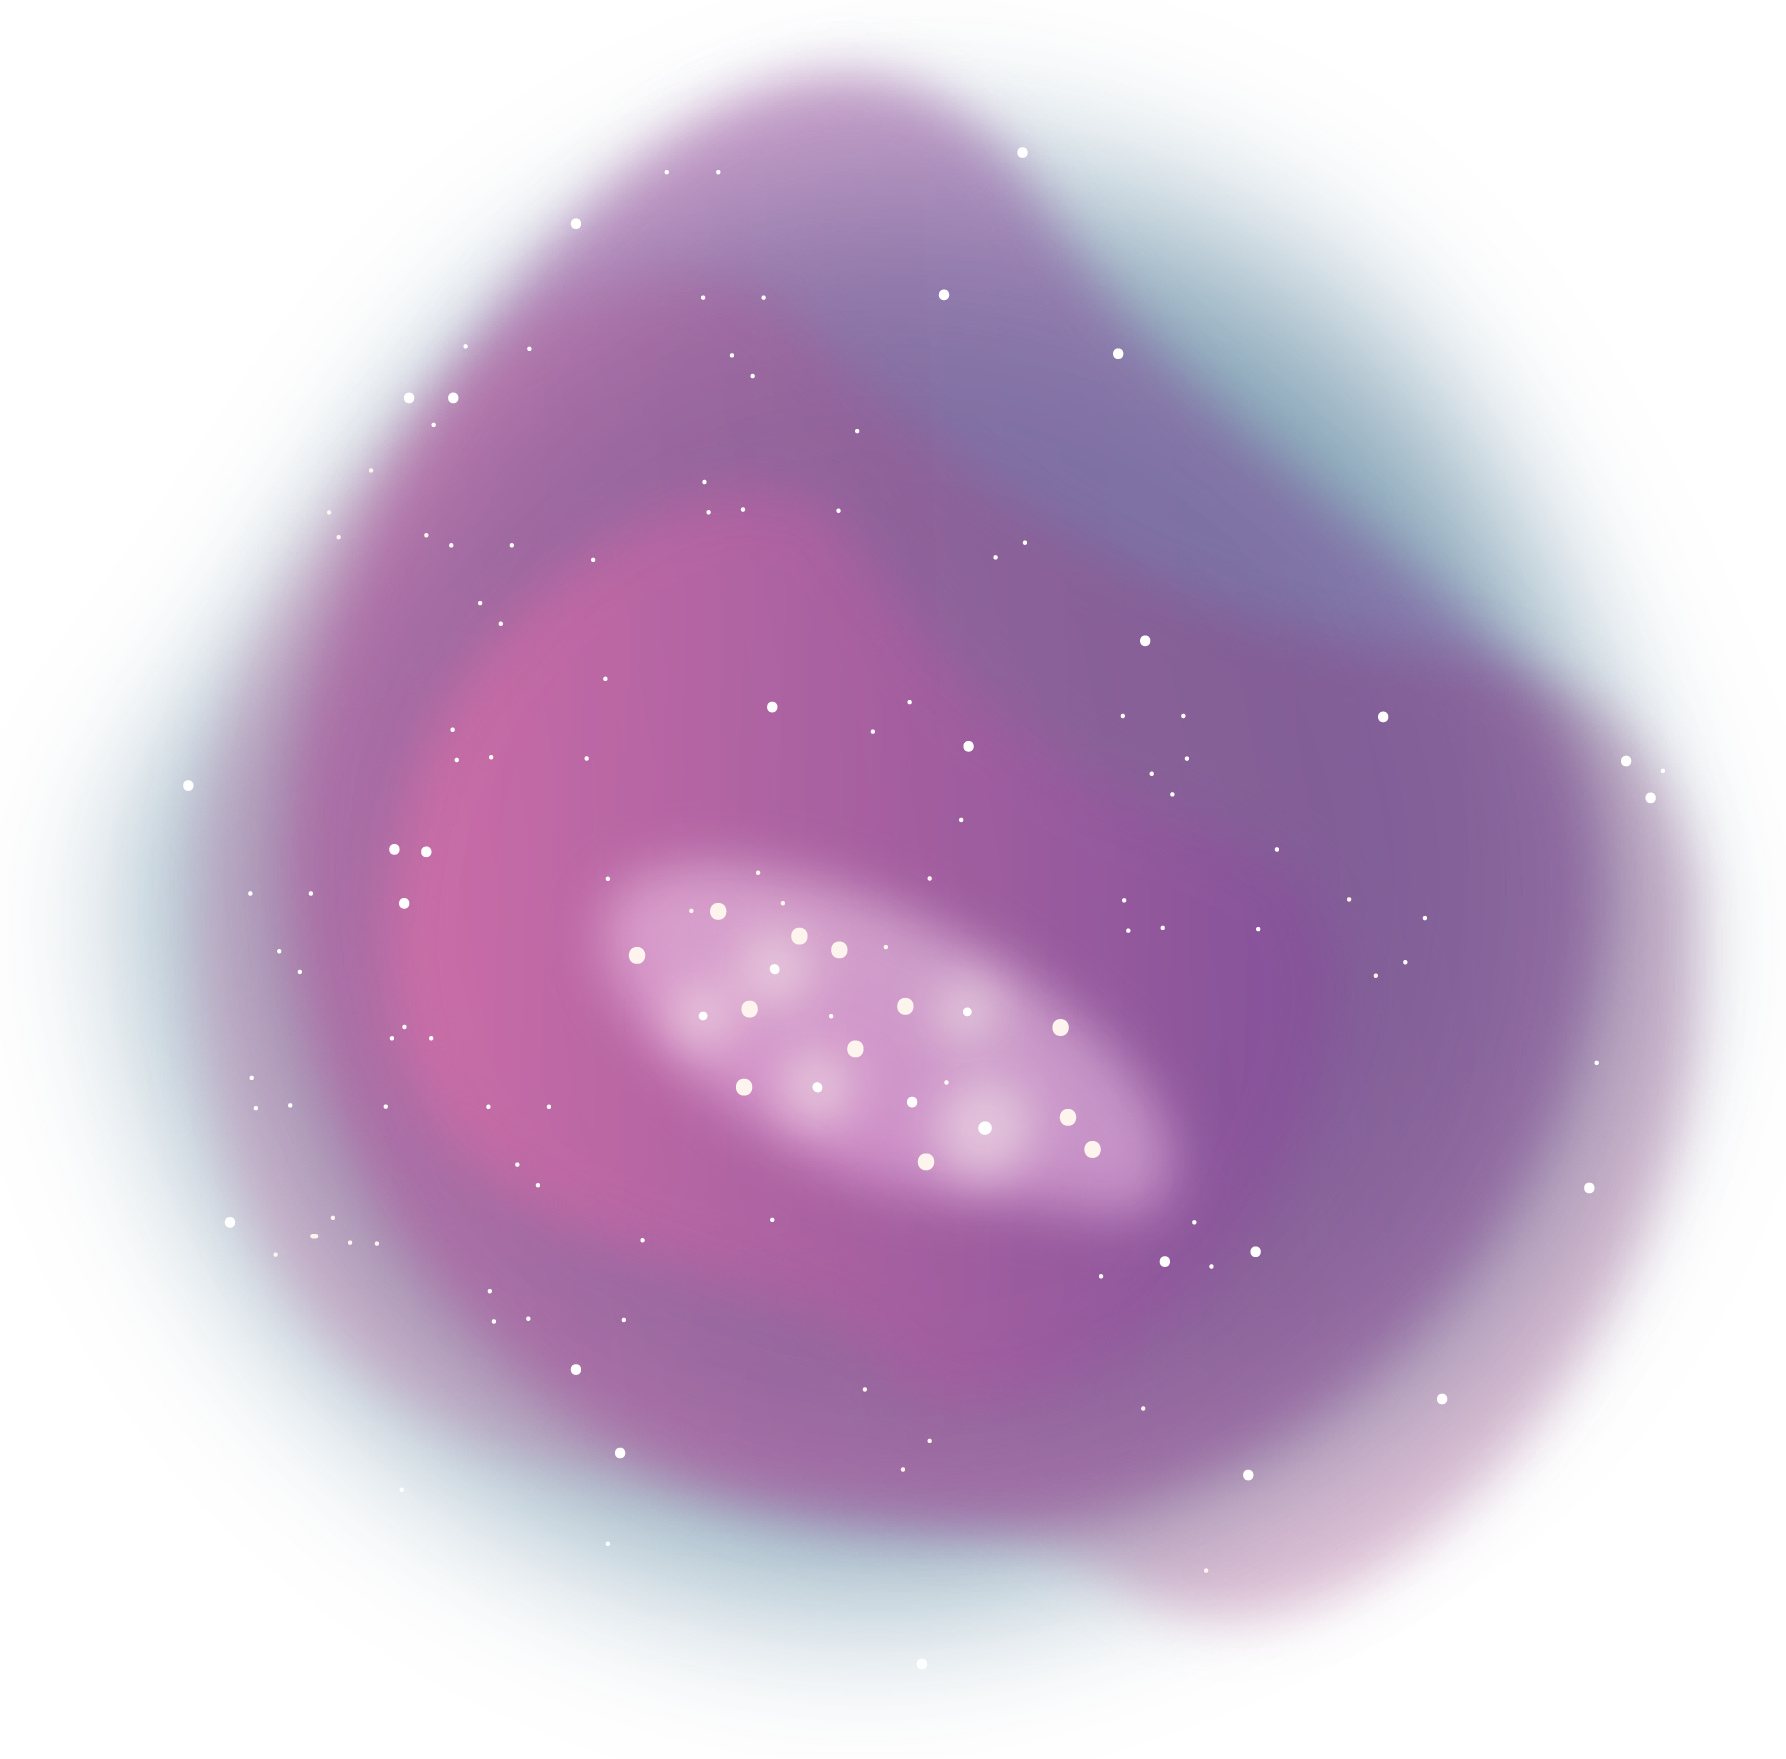 A large, amorphous blob in a subtle tear drop shape has layers of transparent, hazy color overlapping, starting with a small blue haze around the edge and moving inward to a dark purple, a redder purple, and then a brighter purple. While white dots representing stars speckle the whole image, in the center of this shape is a bright white oval cloud with more pronounced and larger stars grouped together. 